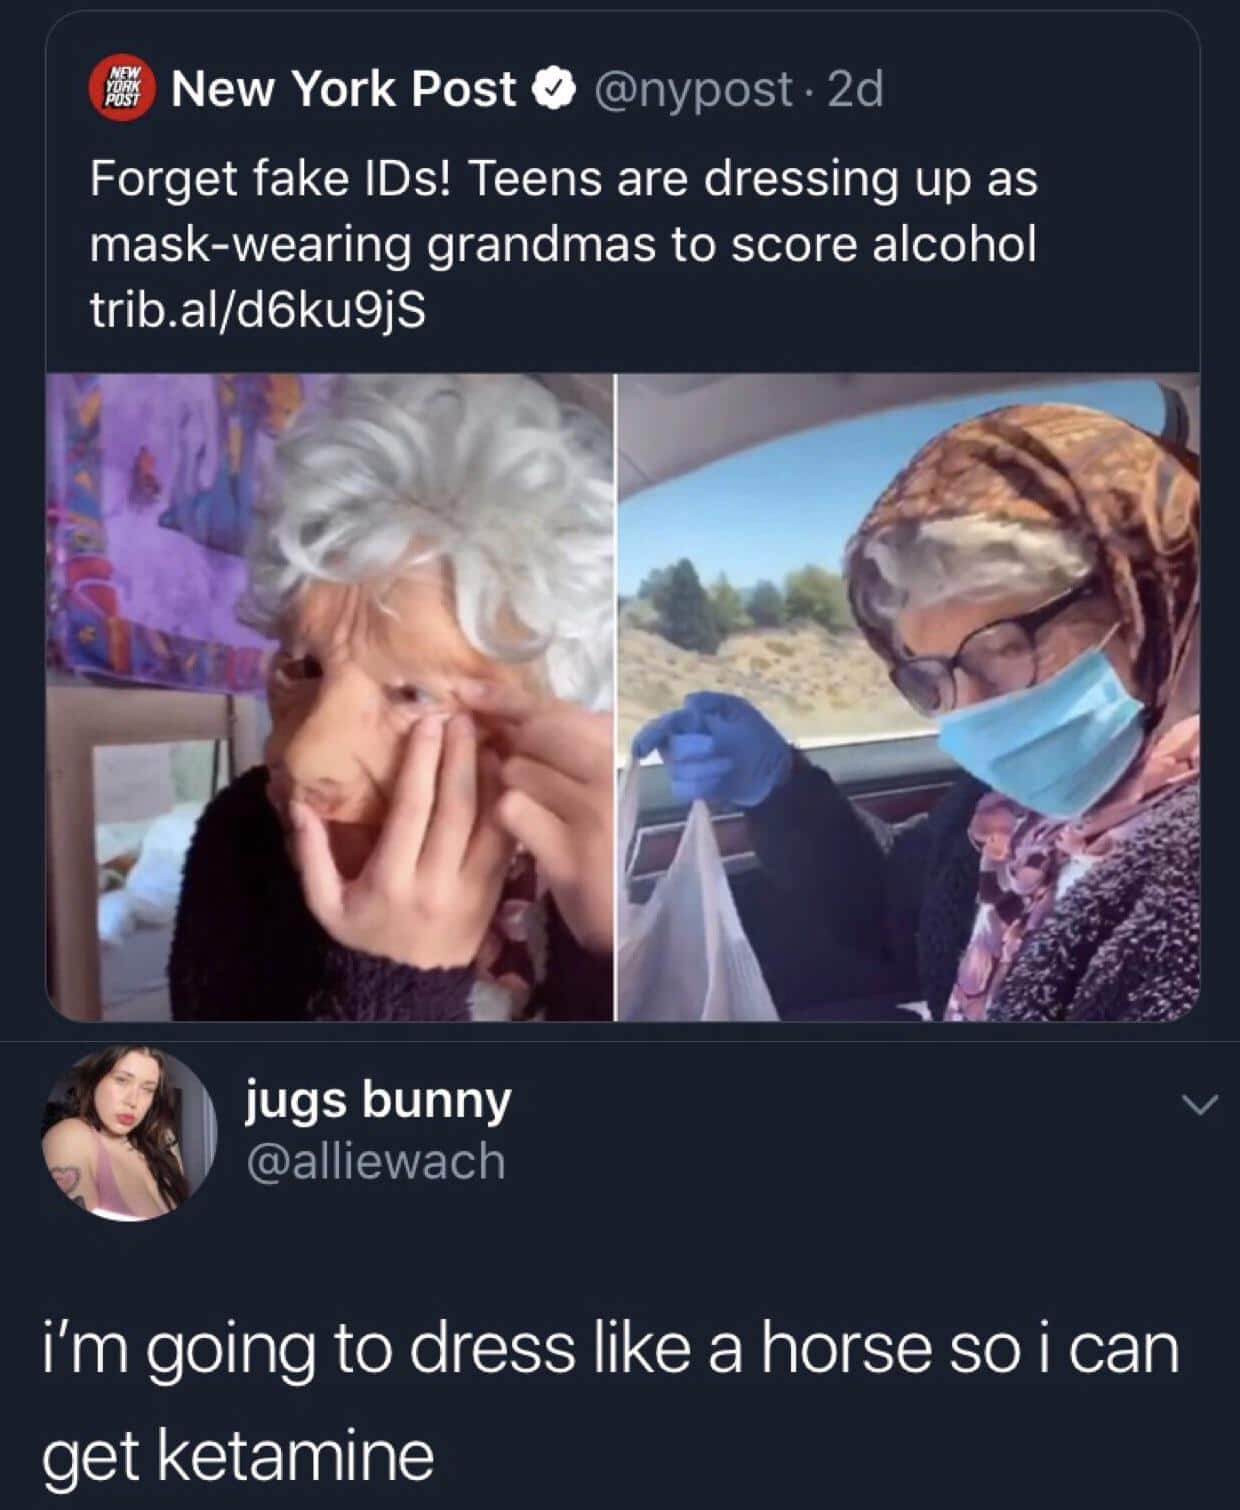 Hold up, Wheel, Spin, HolUp, TNkvvD, Step Dank Memes Hold up, Wheel, Spin, HolUp, TNkvvD, Step text: New York Post e @nypost 2d Forget fake IDs! Teens are dressing up as mask-wearing grandmas to score alcohol trib.al/d6ku9jS jugs bunny \ , @alliewach i'm going to dress like a horse so i can get ketamine 